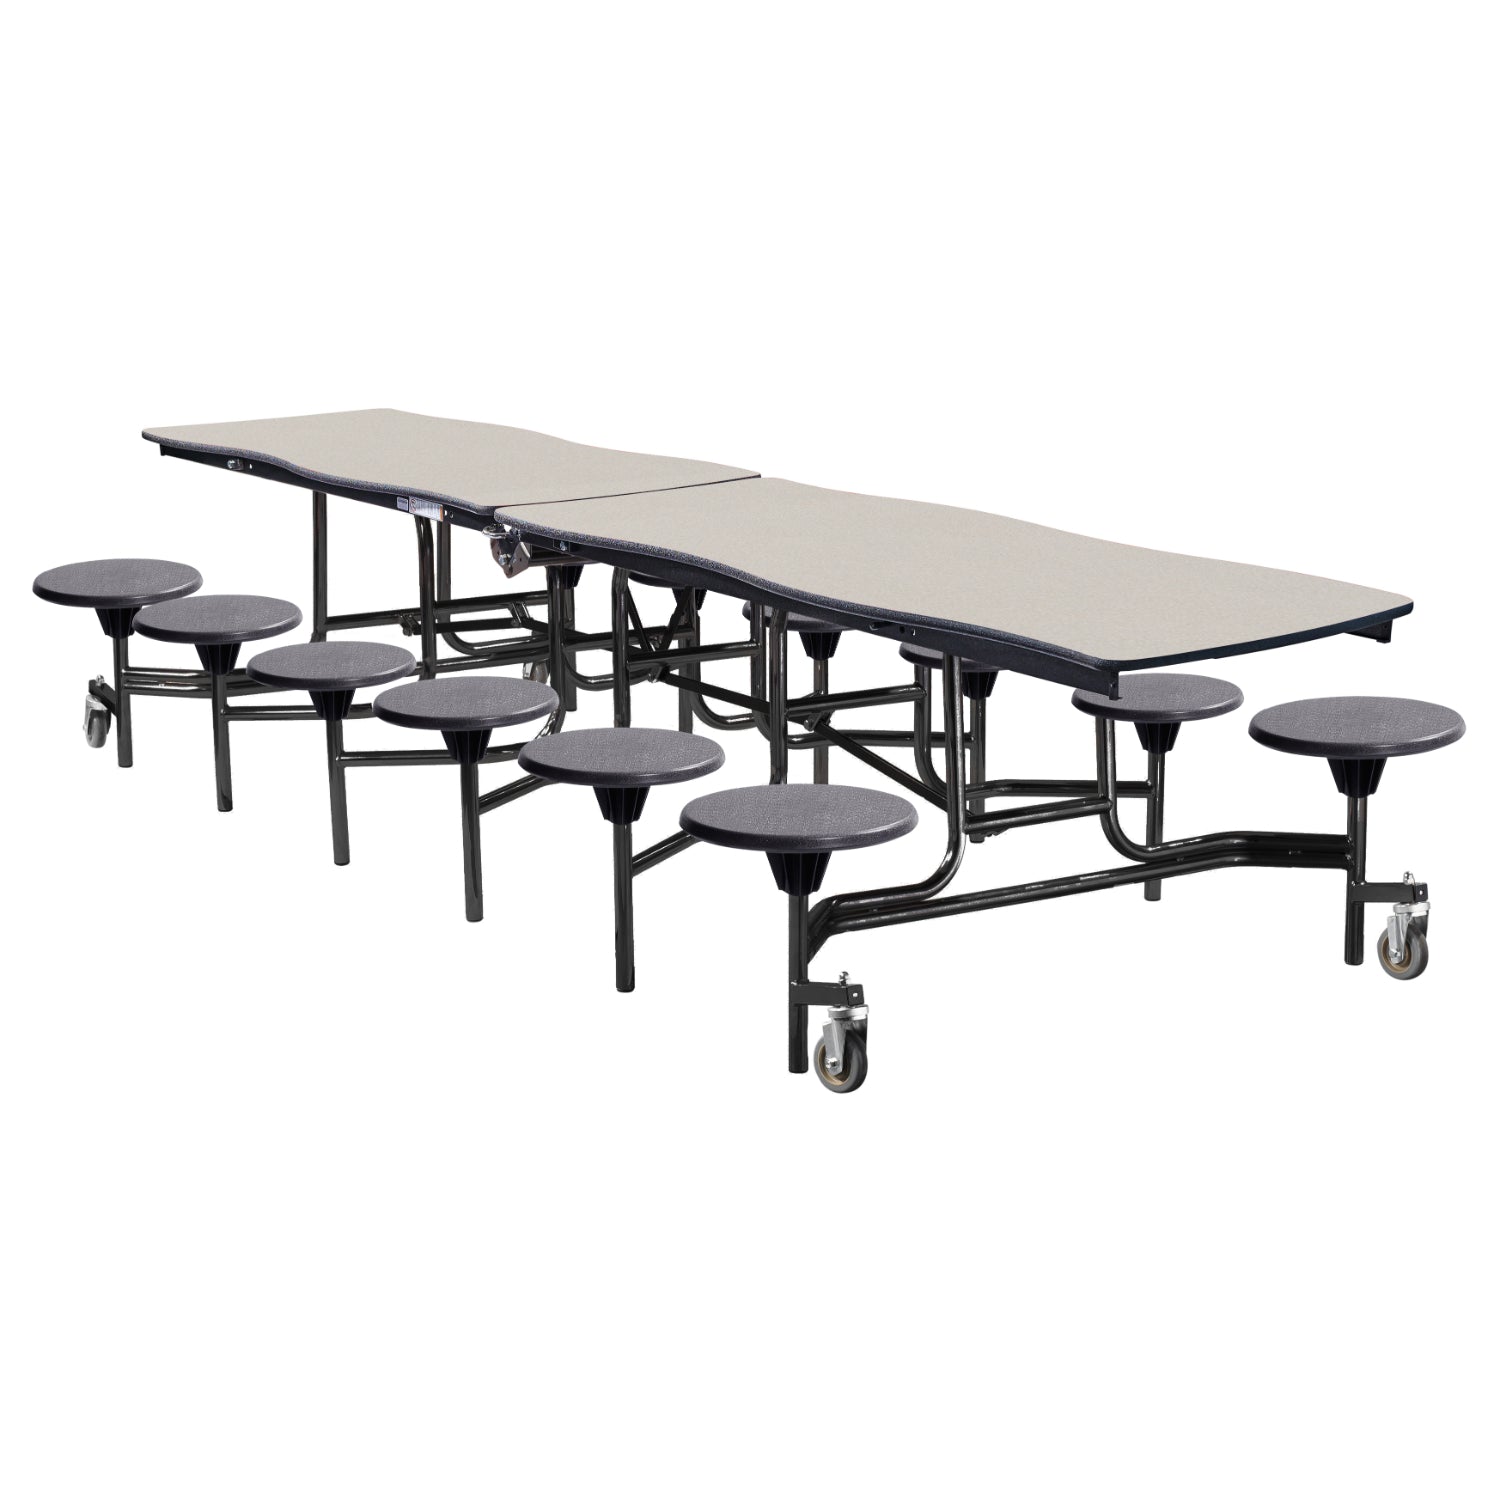 Mobile Cafeteria Table with 12 Stools, 12' Swerve, Plywood Core, Vinyl T-Mold Edge, Textured Black Frame